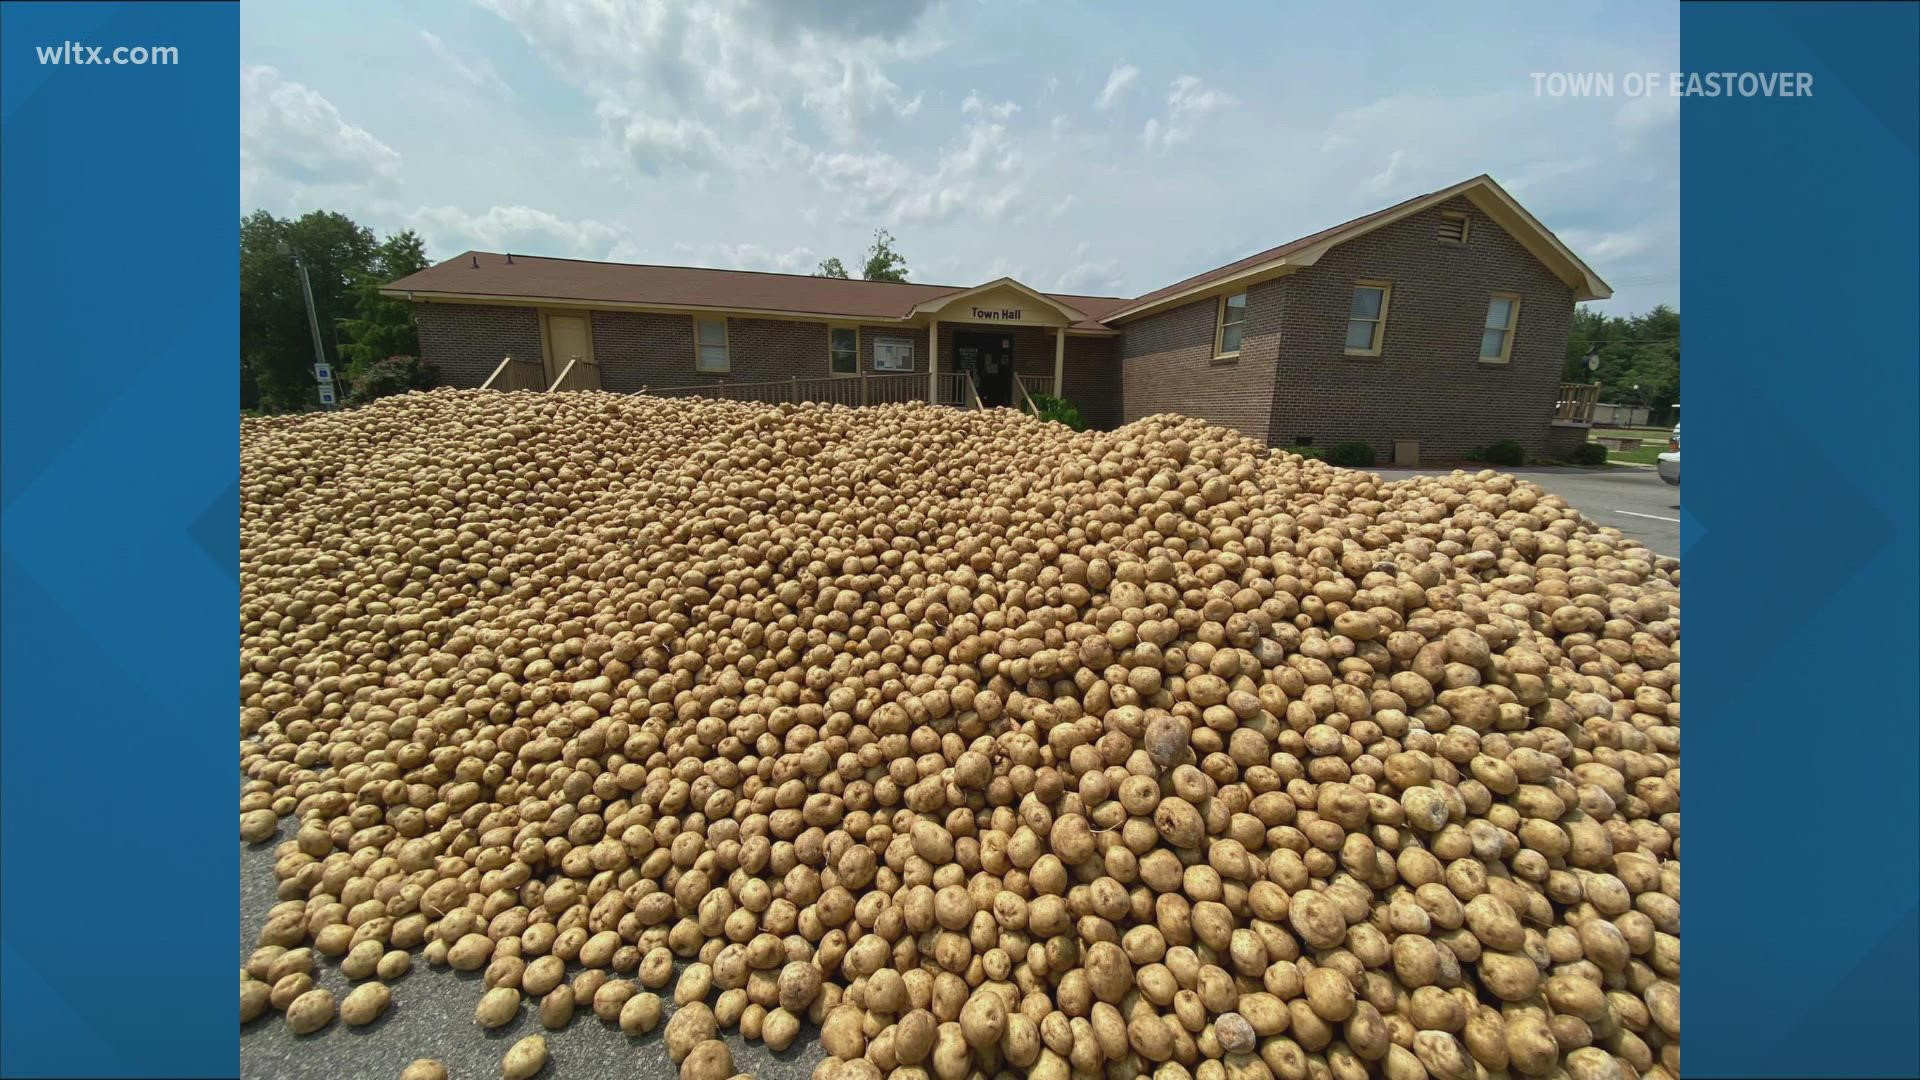 Mountain of potatoes in Town of Eastover, South Carolina